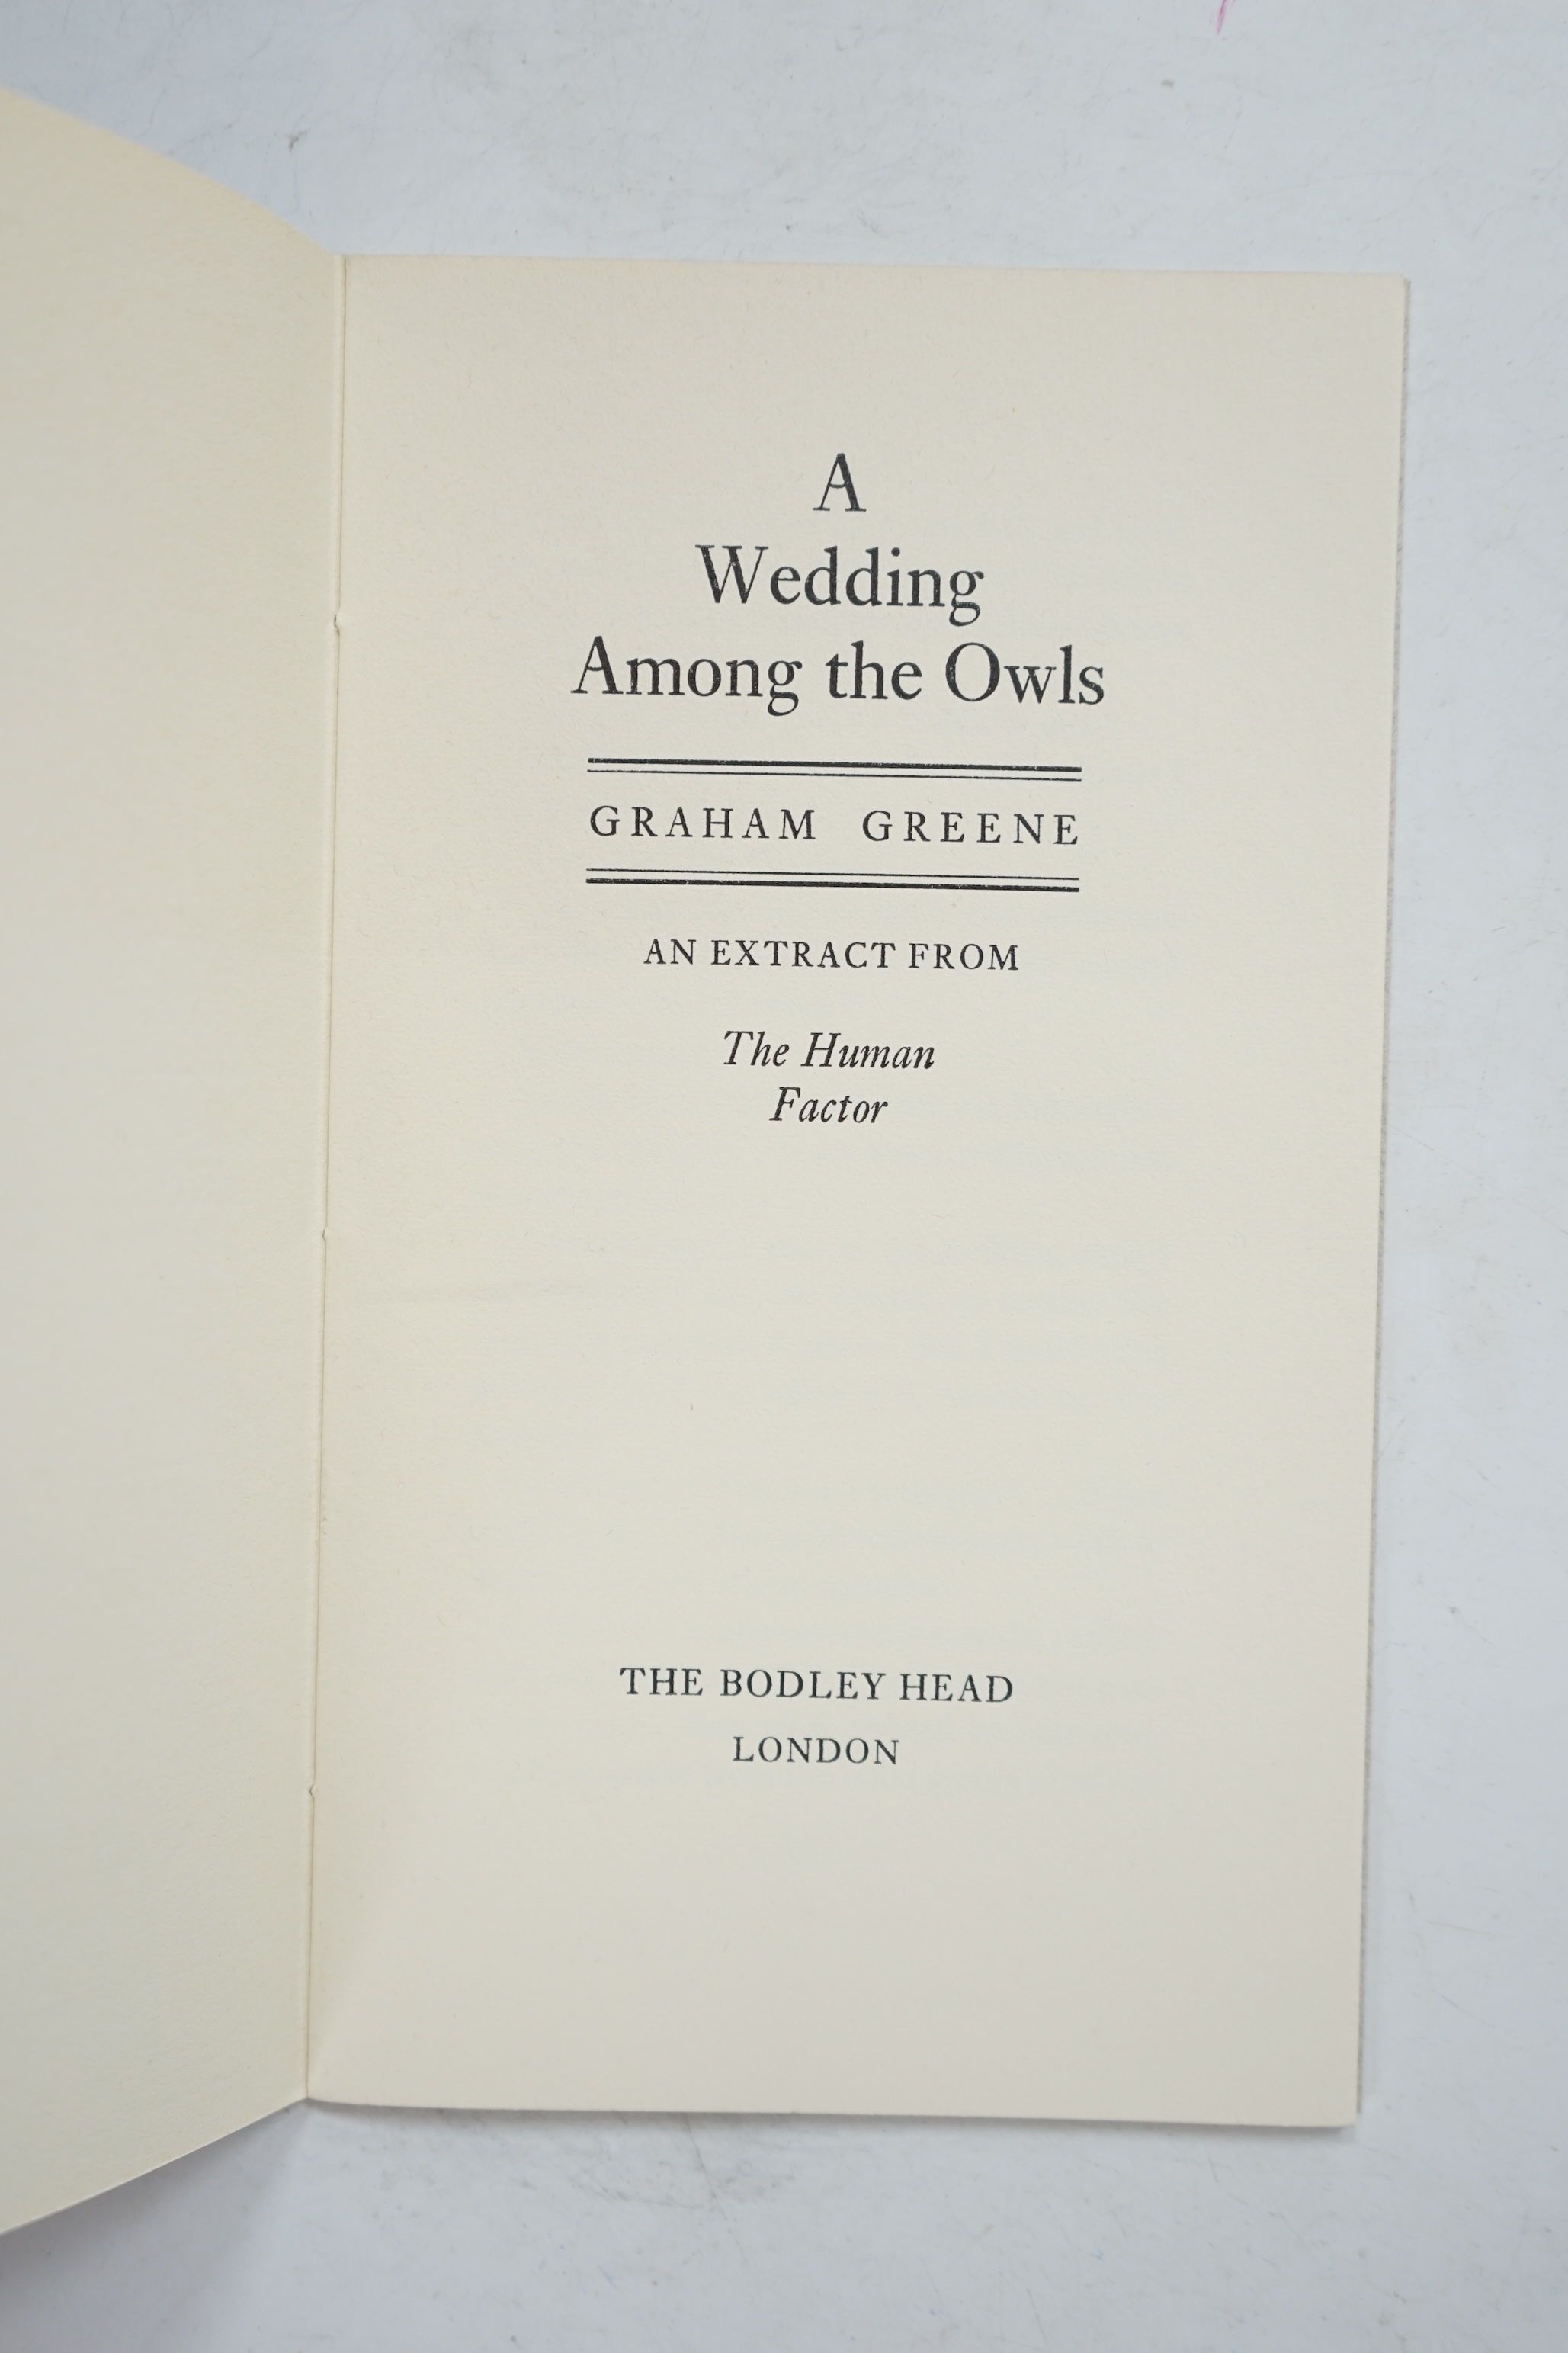 Greene, Graham - A Wedding among the Owls. An extract from The Human Factor. Limited Edition (of 250 copies). original printed wrappers. Bodley Head, (1977)